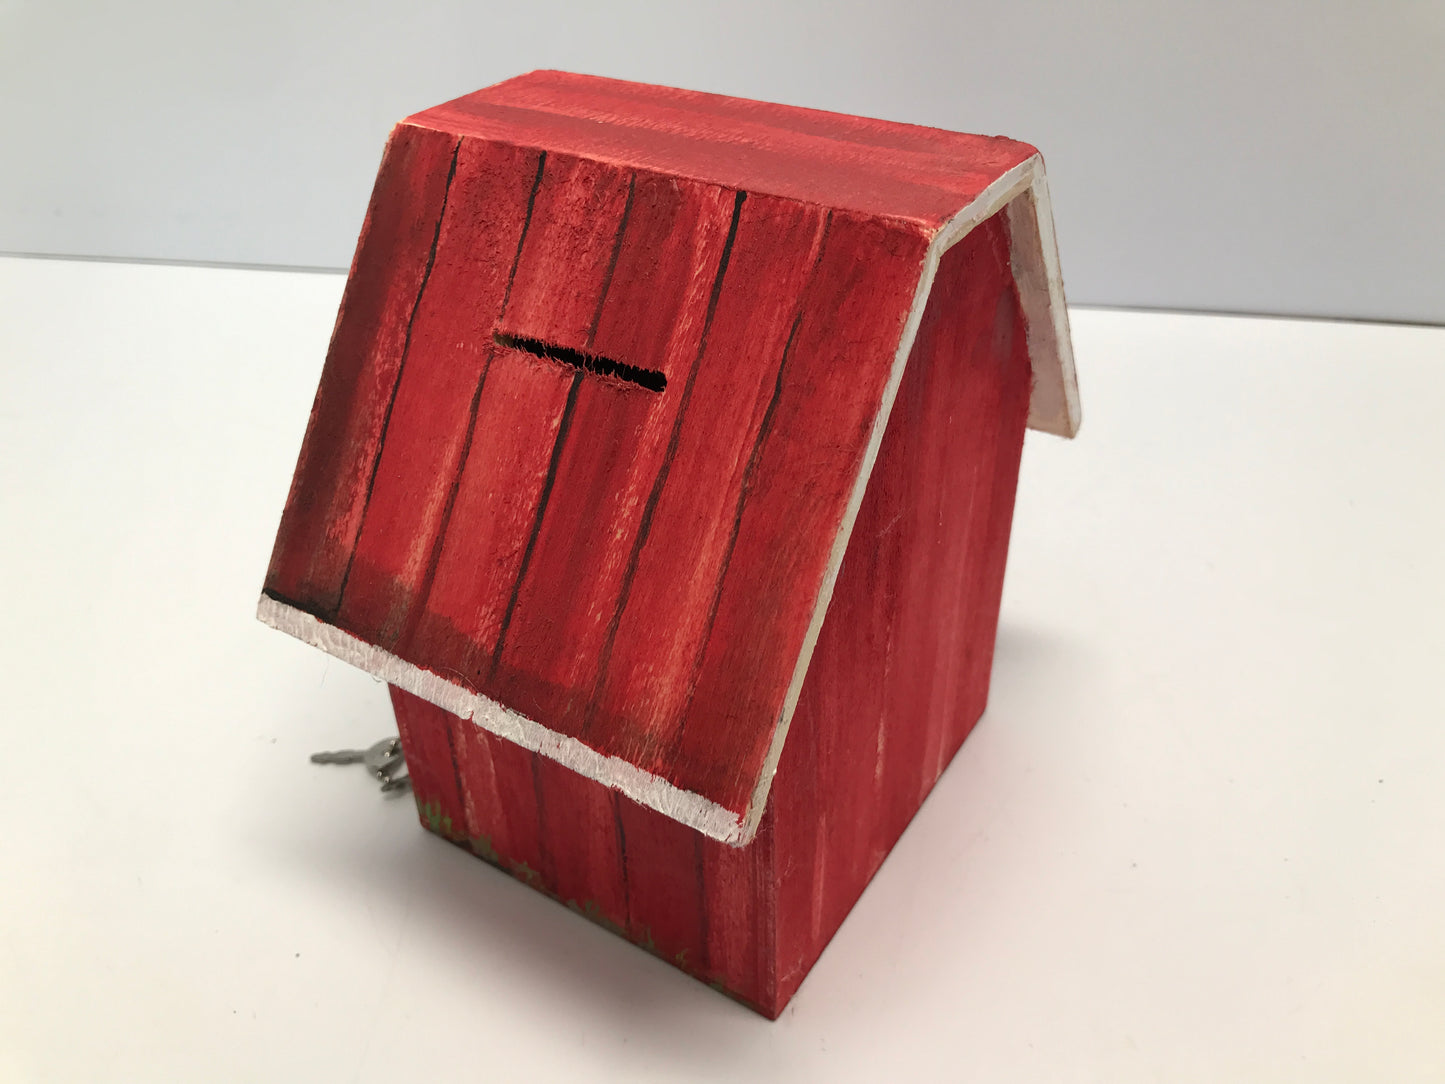 Handmade And Painted Horse Barn 7x6x4.5 Piggy Bank Lock and Key